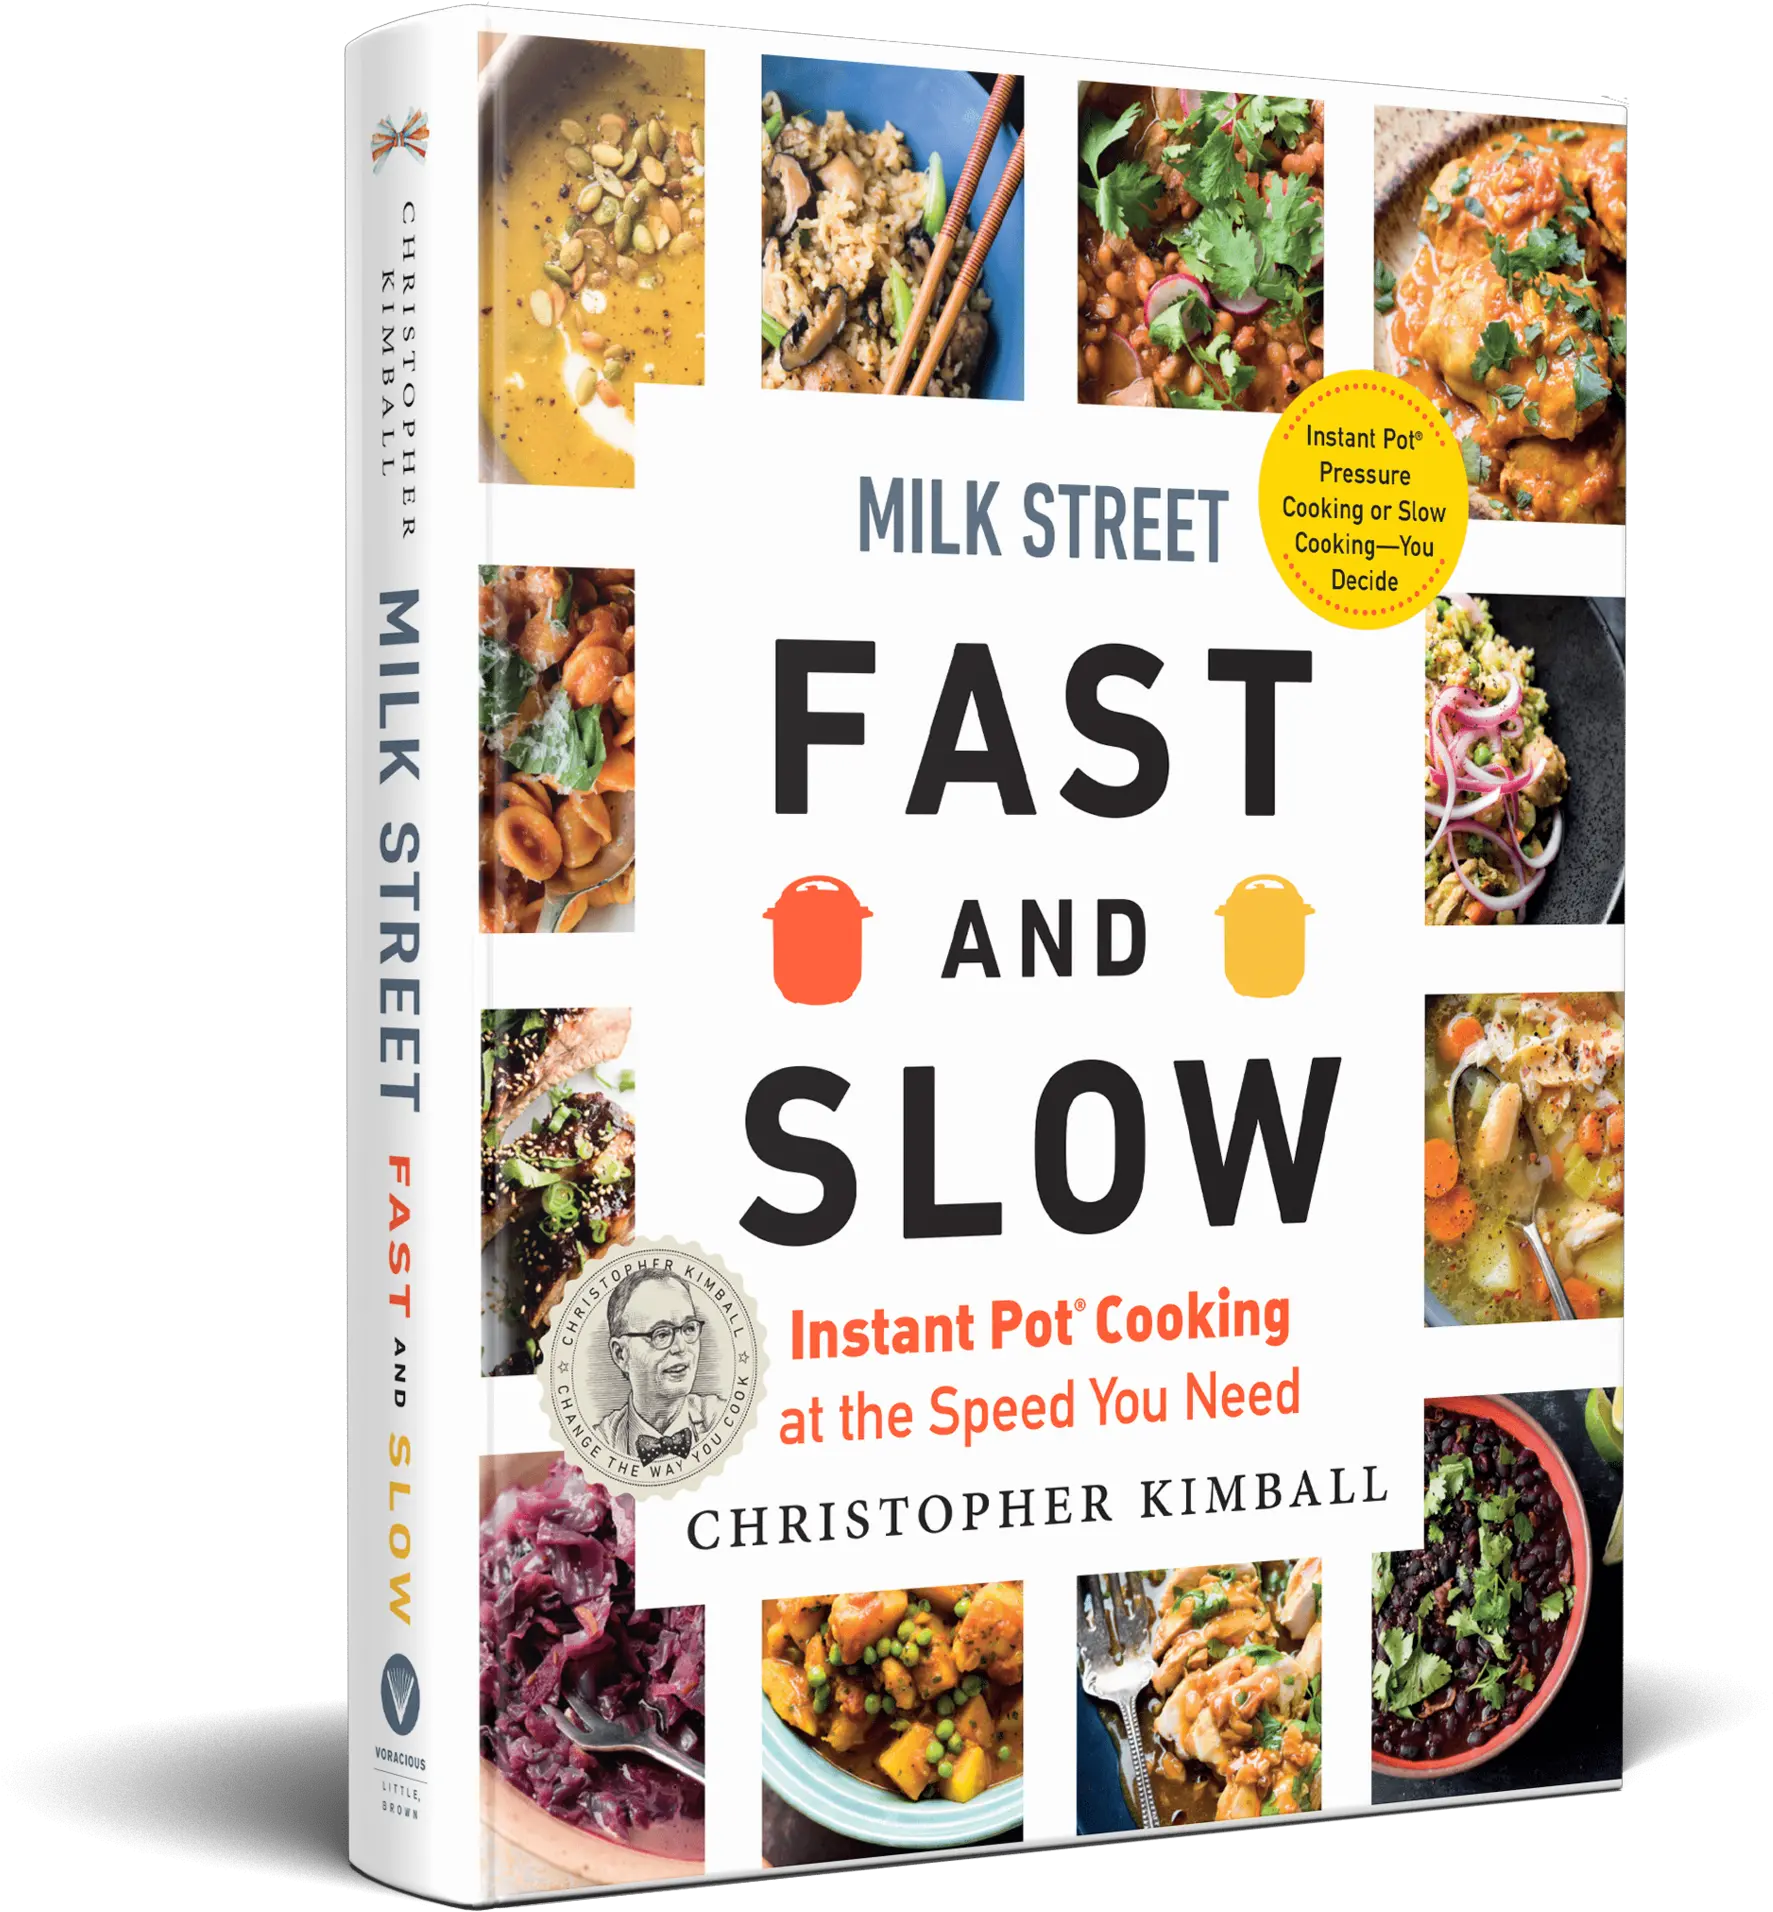 Milk Street Fast And Slow Instant Pot Cookbook Milk Street Fast And Slow Instant Pot Pdf Png Doo The Icon Of Sin